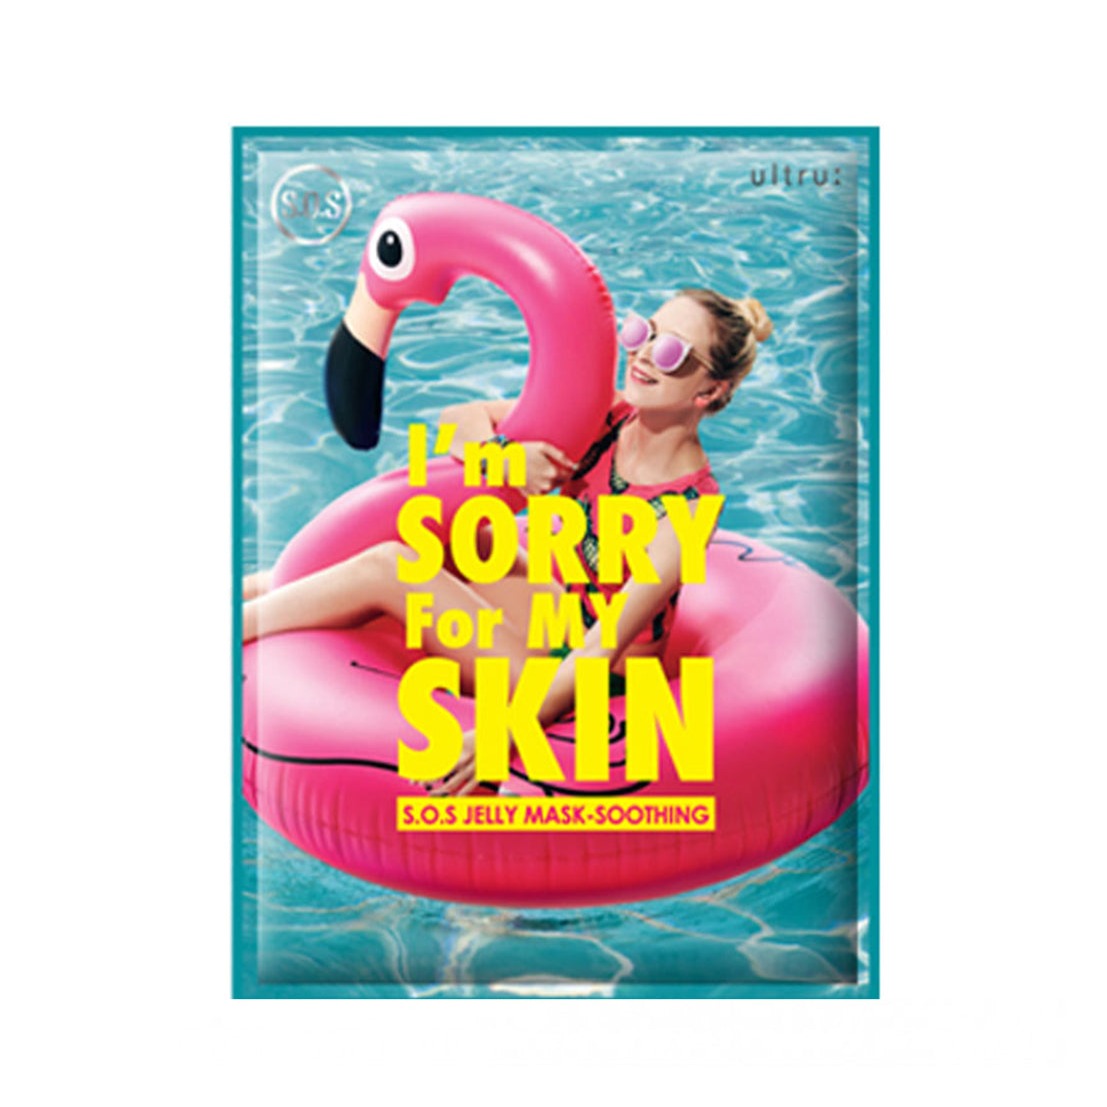 ULTRU I'm Sorry For My Skin S.O.S Soothing Jelly Mask asian authentic genuine original korean skincare montreal toronto calgary canada thekshop thekshop.ca natural organic vegan cruelty-free cosmetics kbeauty vancouver free shipping clean beauty routine skin makeup